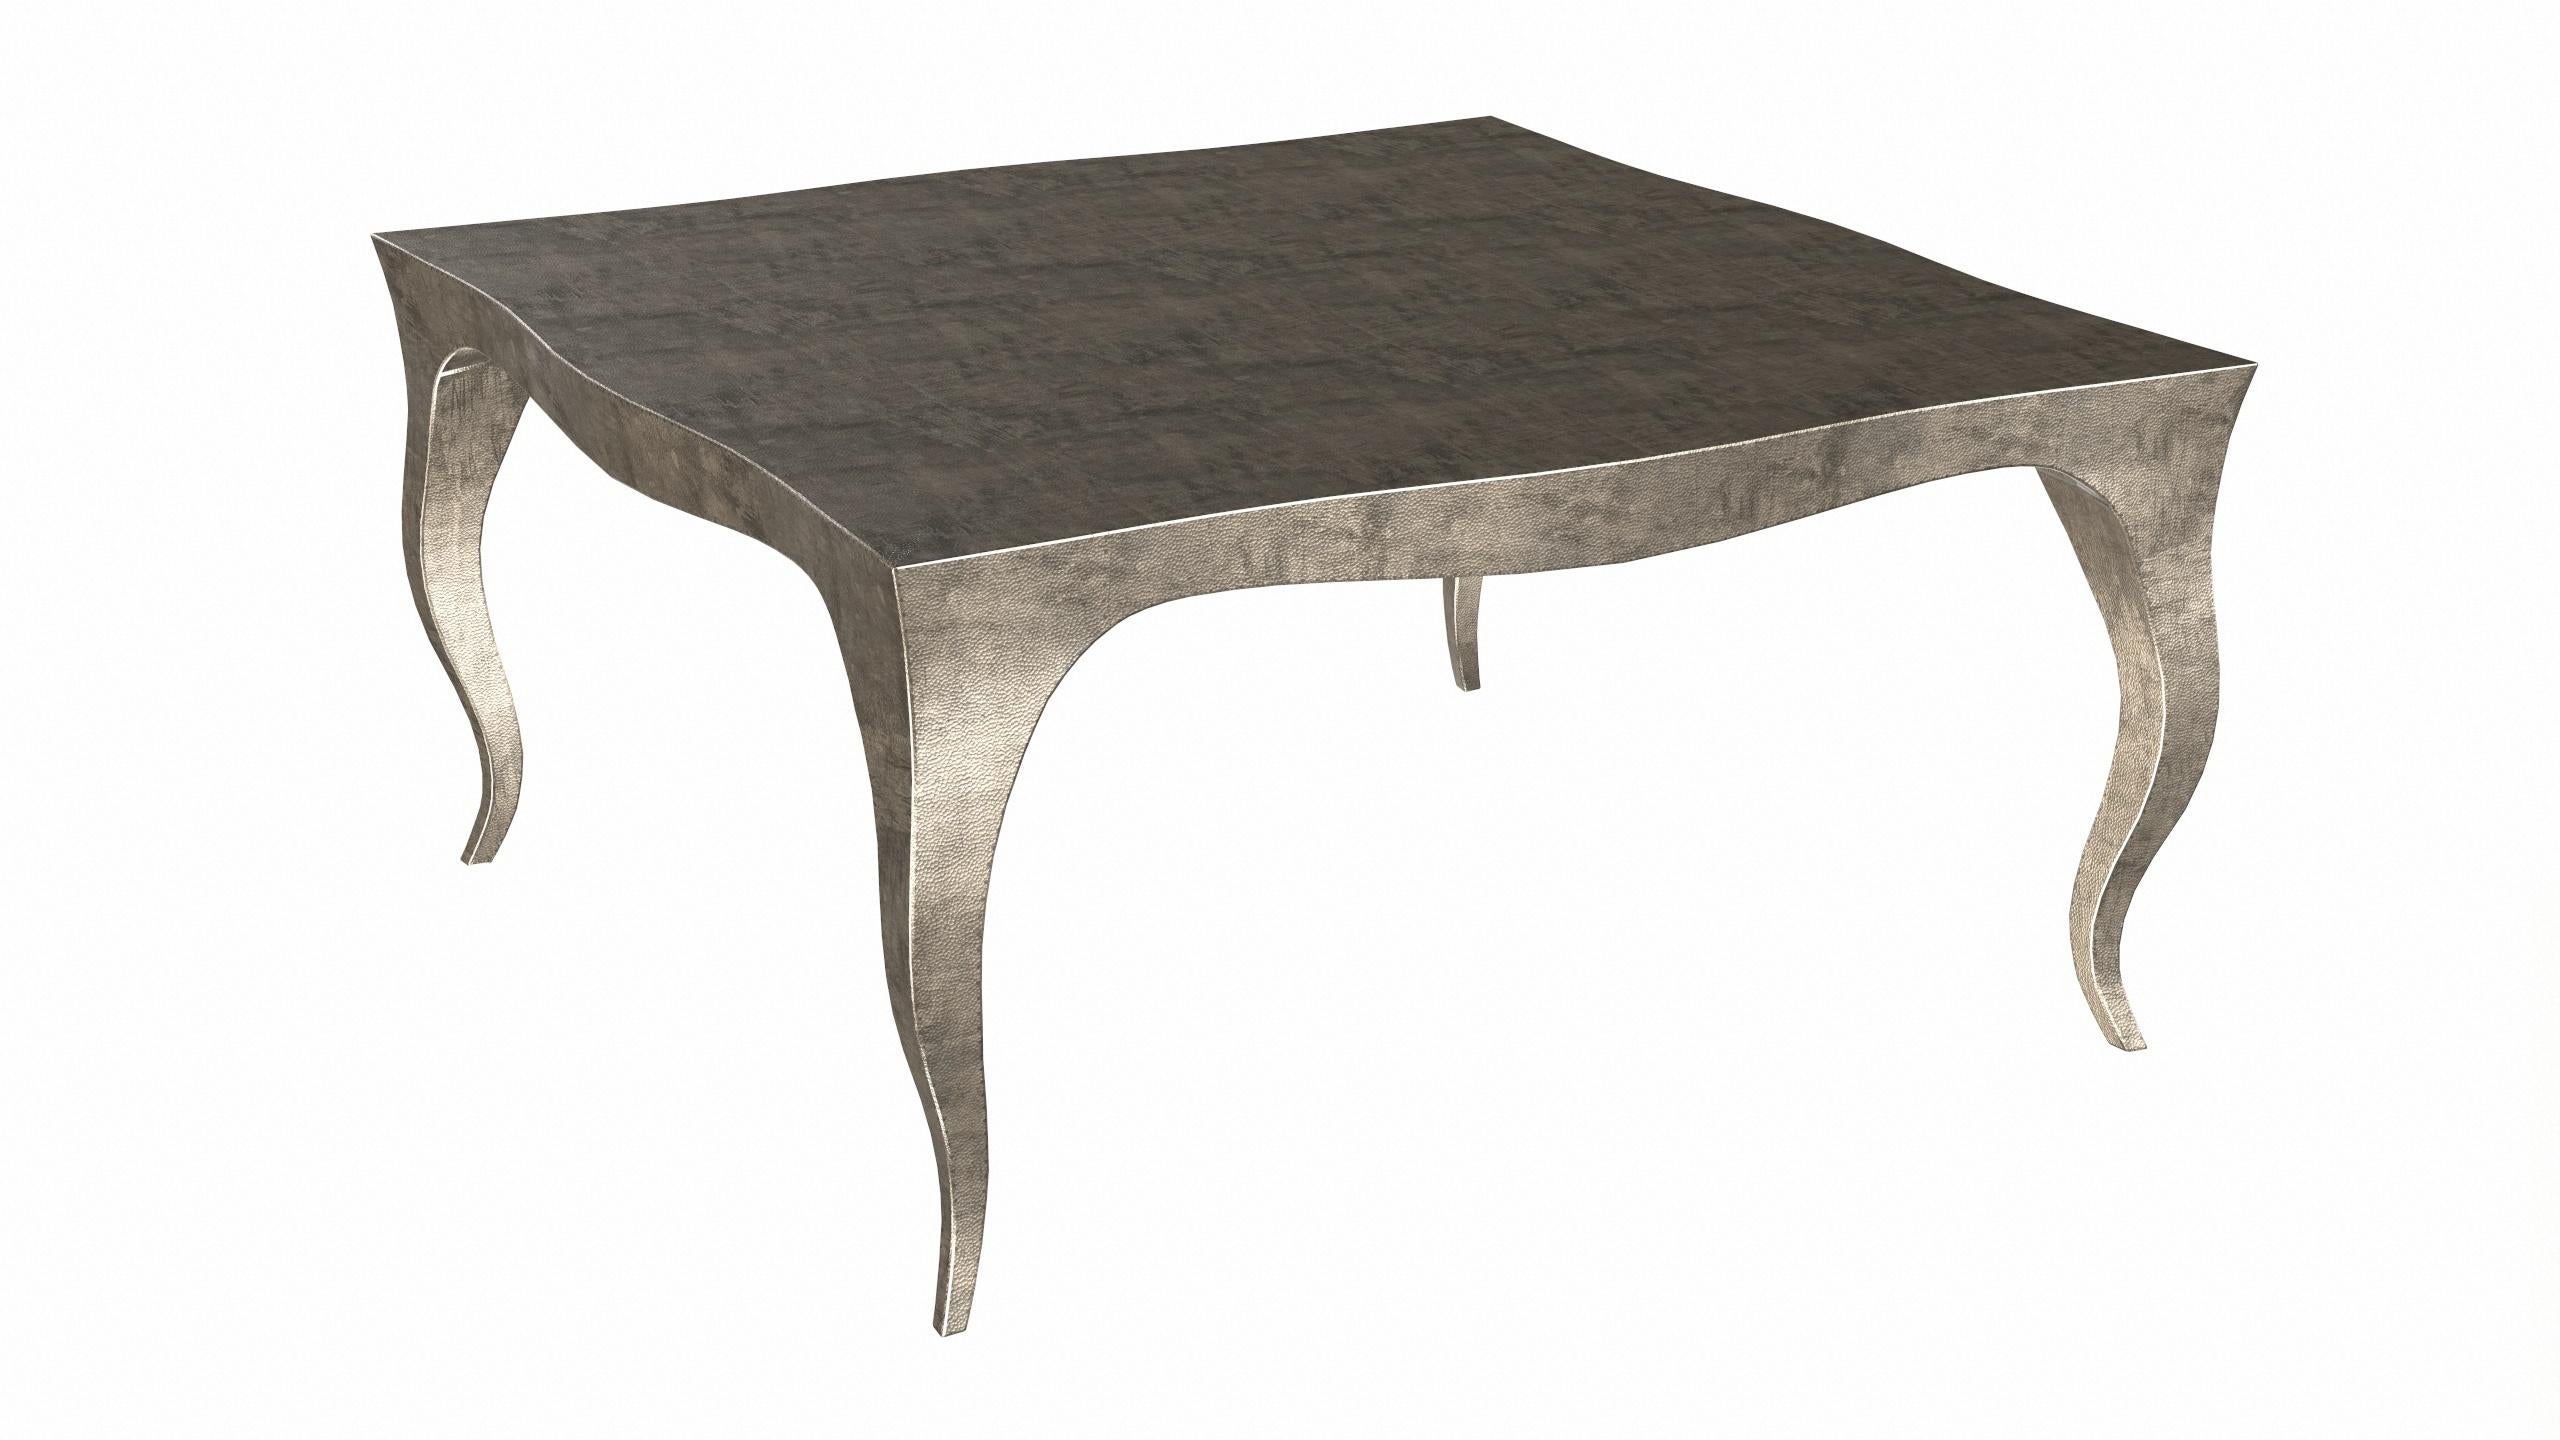 Woodwork Louise Art Deco Center Tables Mid. Hammered Antique Bronze 18.5x18.5x10 inch   For Sale